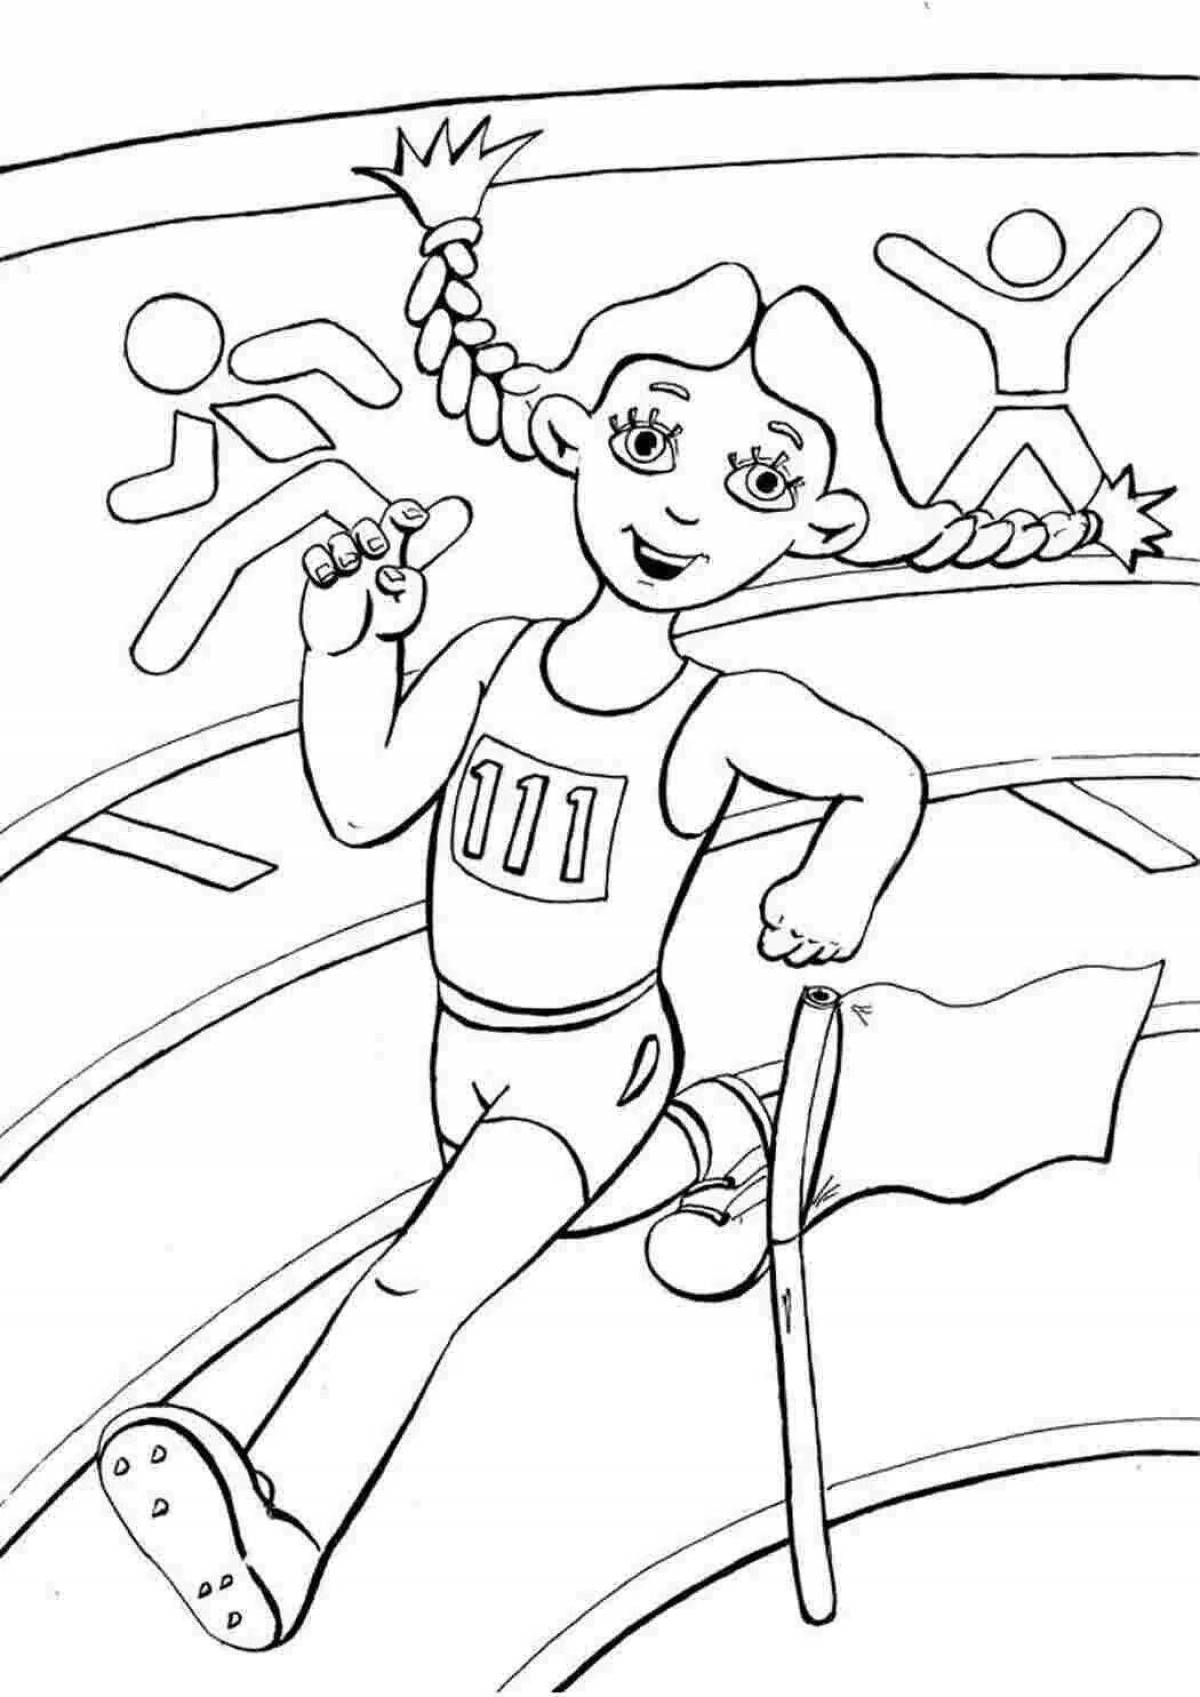 Coloring page of serene health